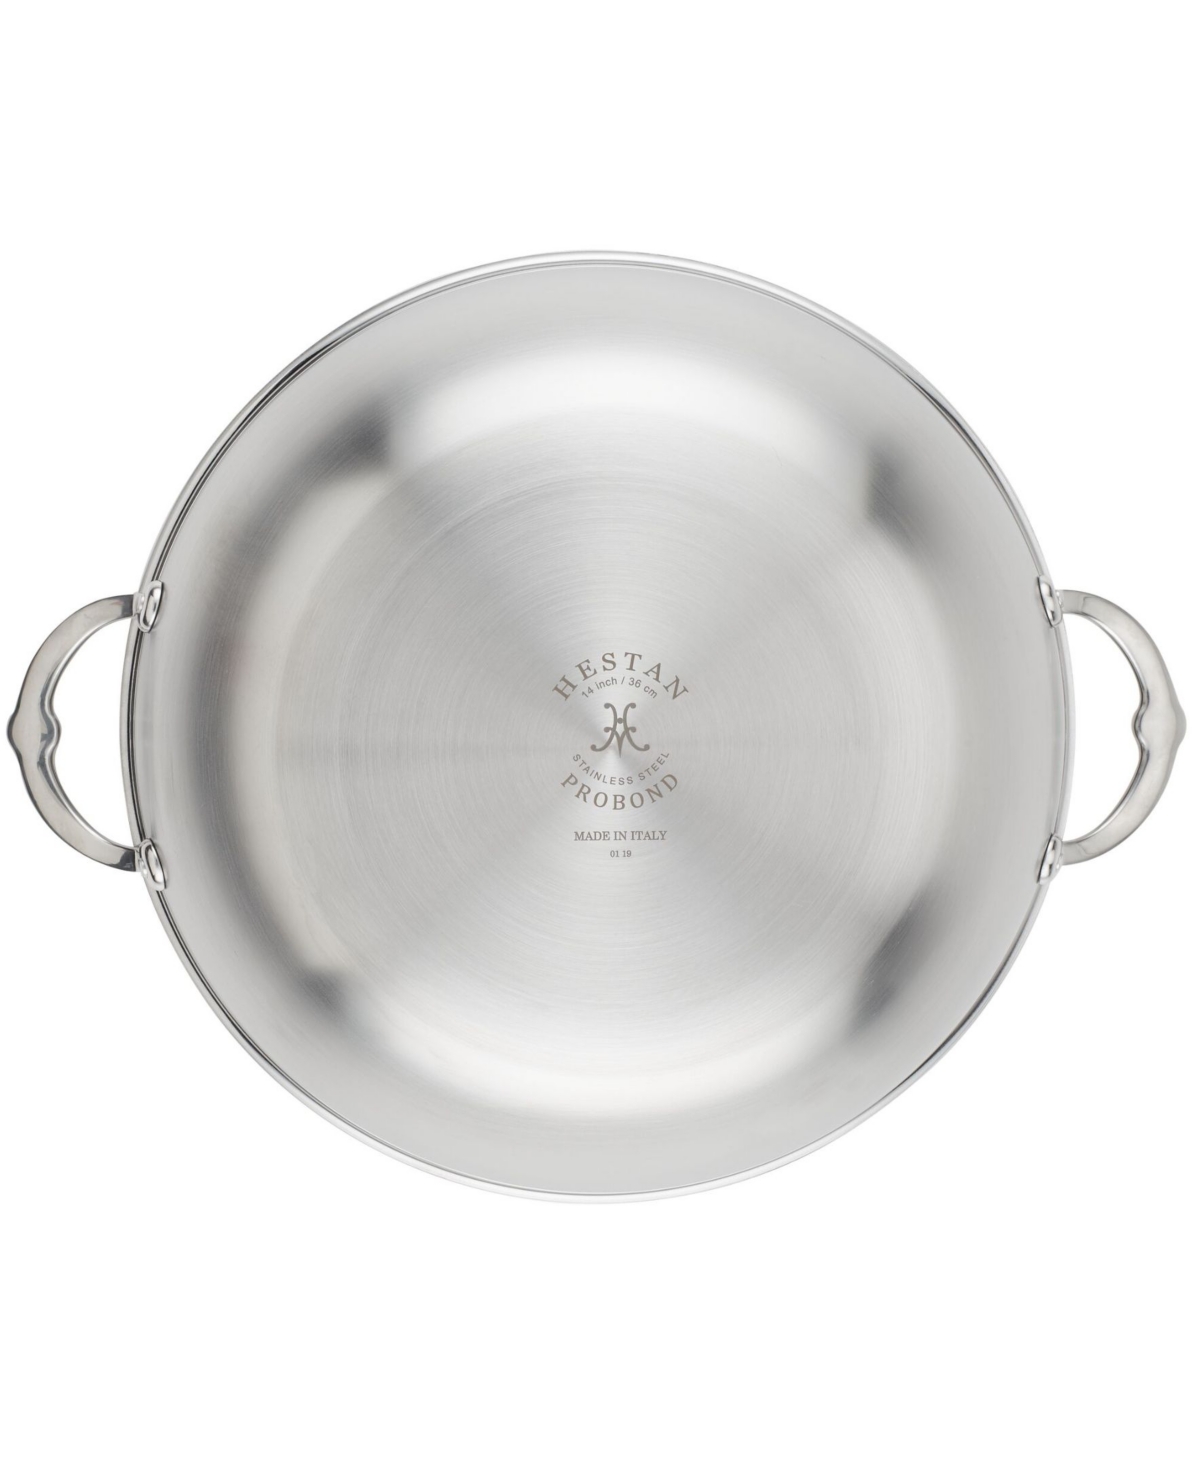 Shop Hestan Probond Clad Stainless Steel 14" Covered Wok